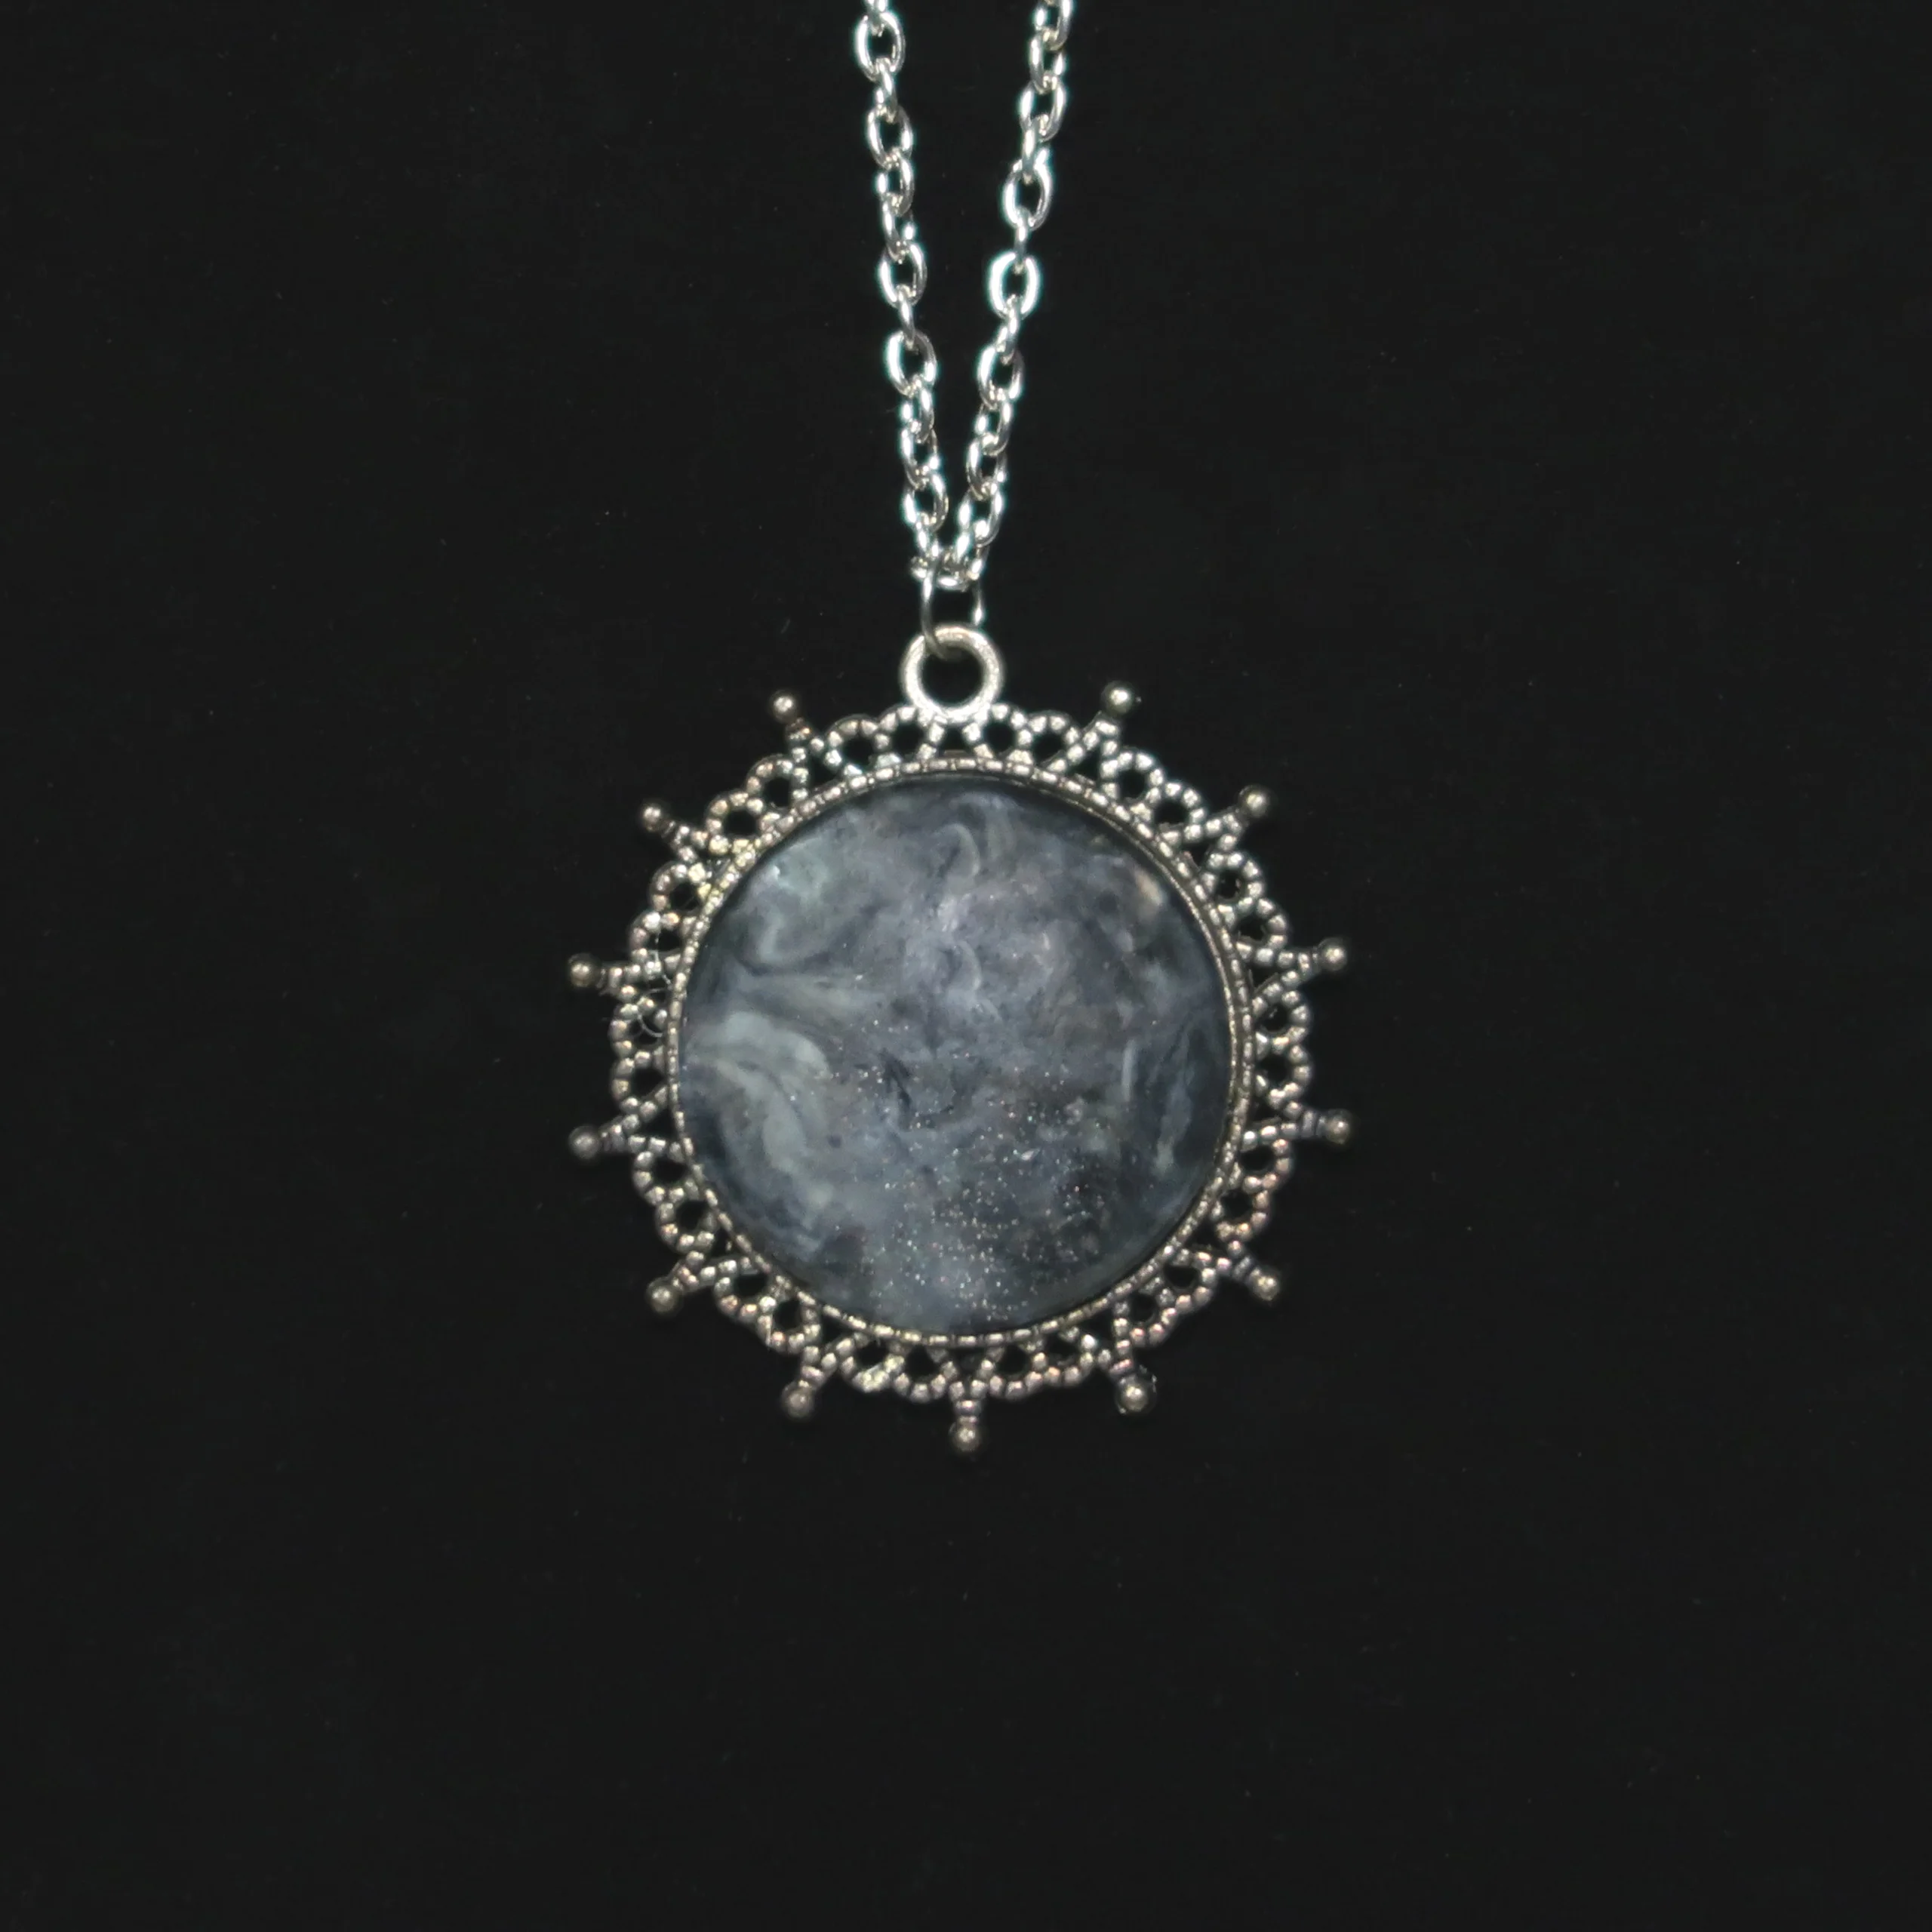 Black Marbled Silver Pendant - $18.00